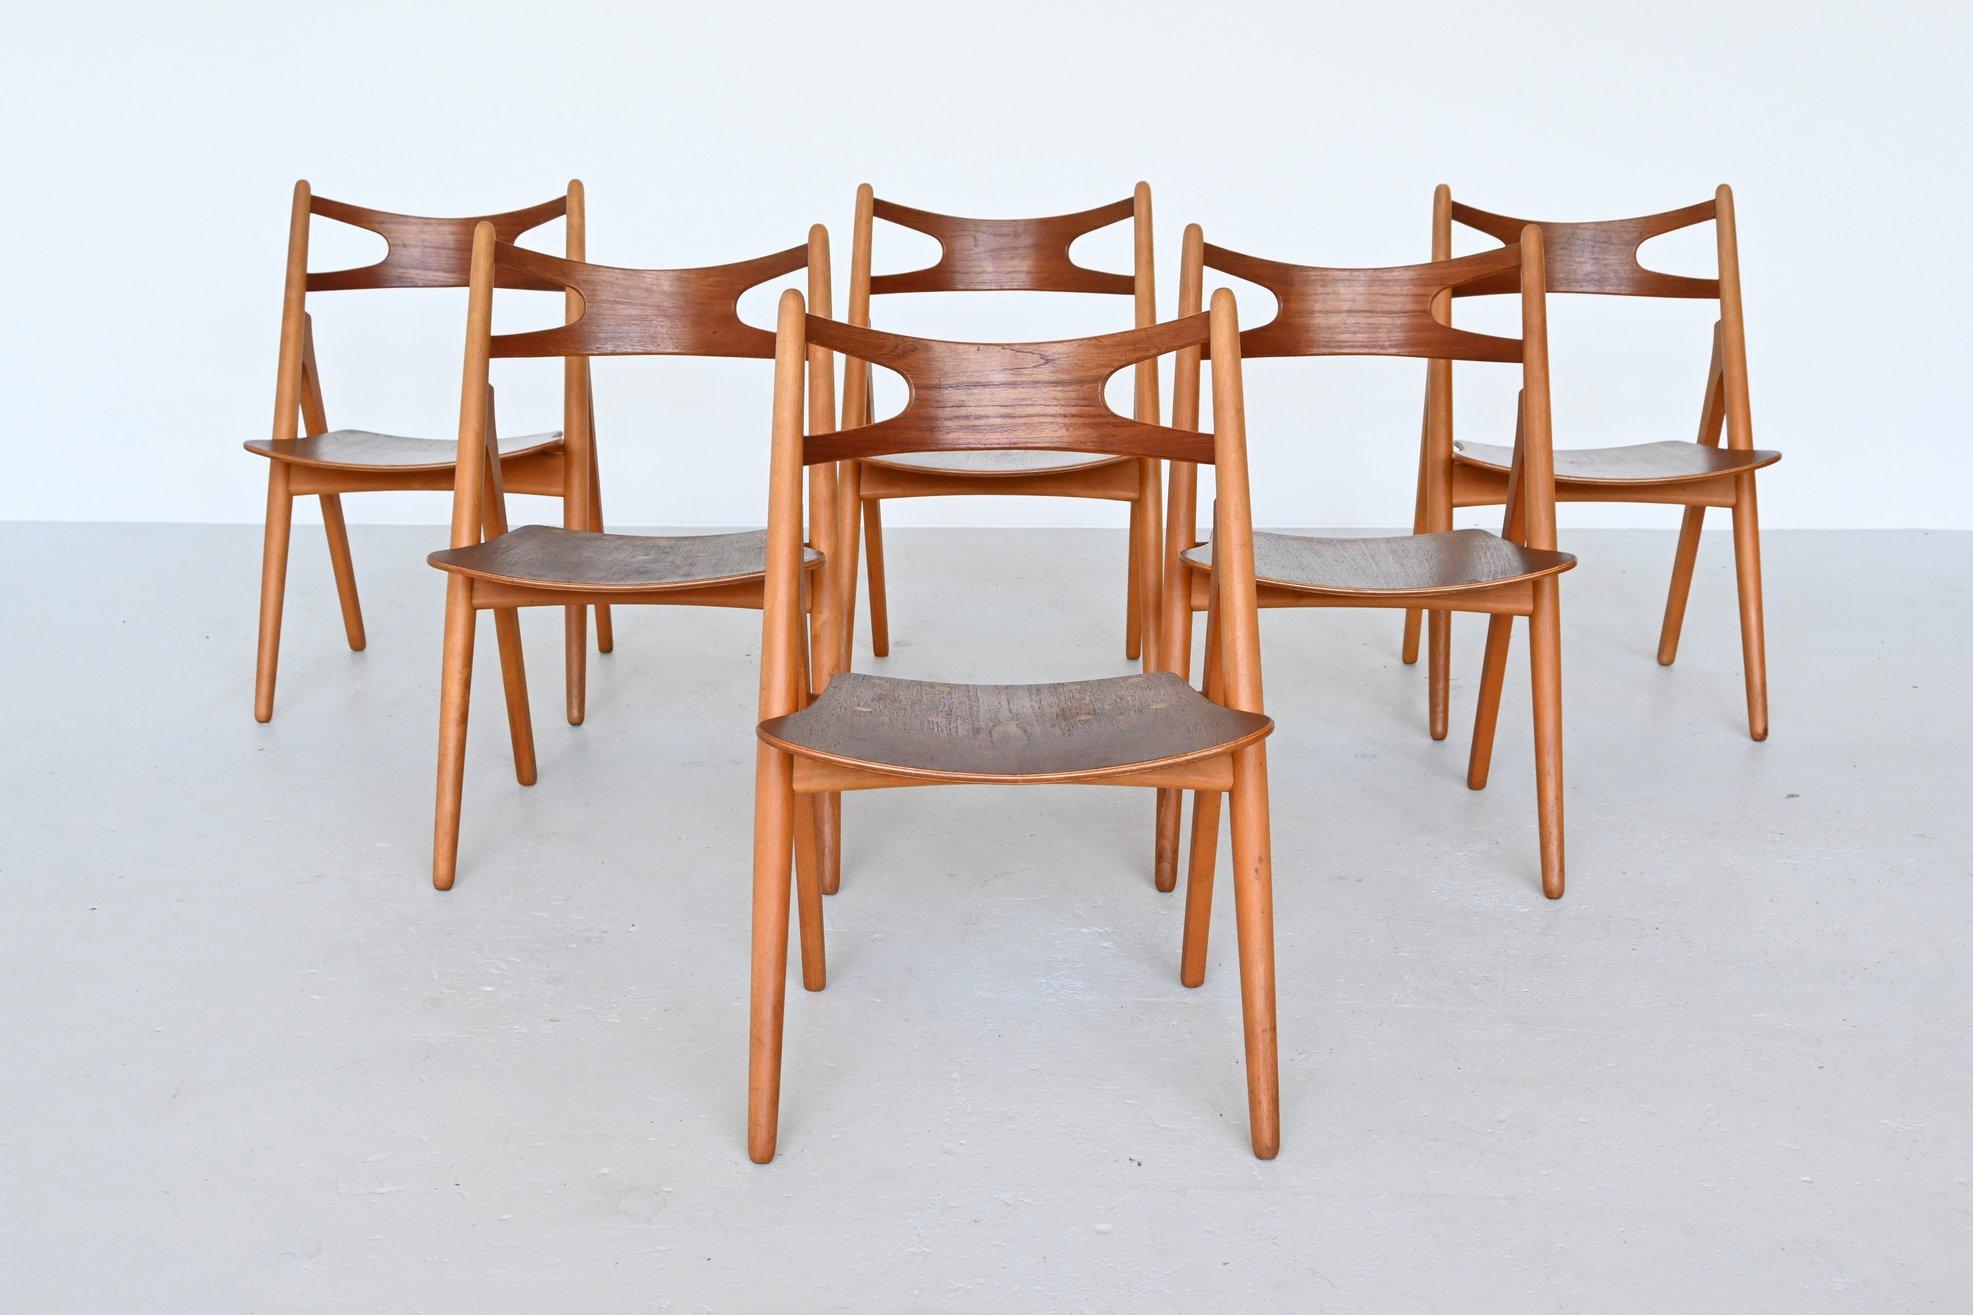 Amazing set of 6 iconic model CH29 dining chairs designed by Hans J. Wegner and manufactured by Carl Hansen & Søn, Denmark 1952. This design Classic is also called “Sawbuck chair” because the model resembles a sawhorse. The sawhorse was